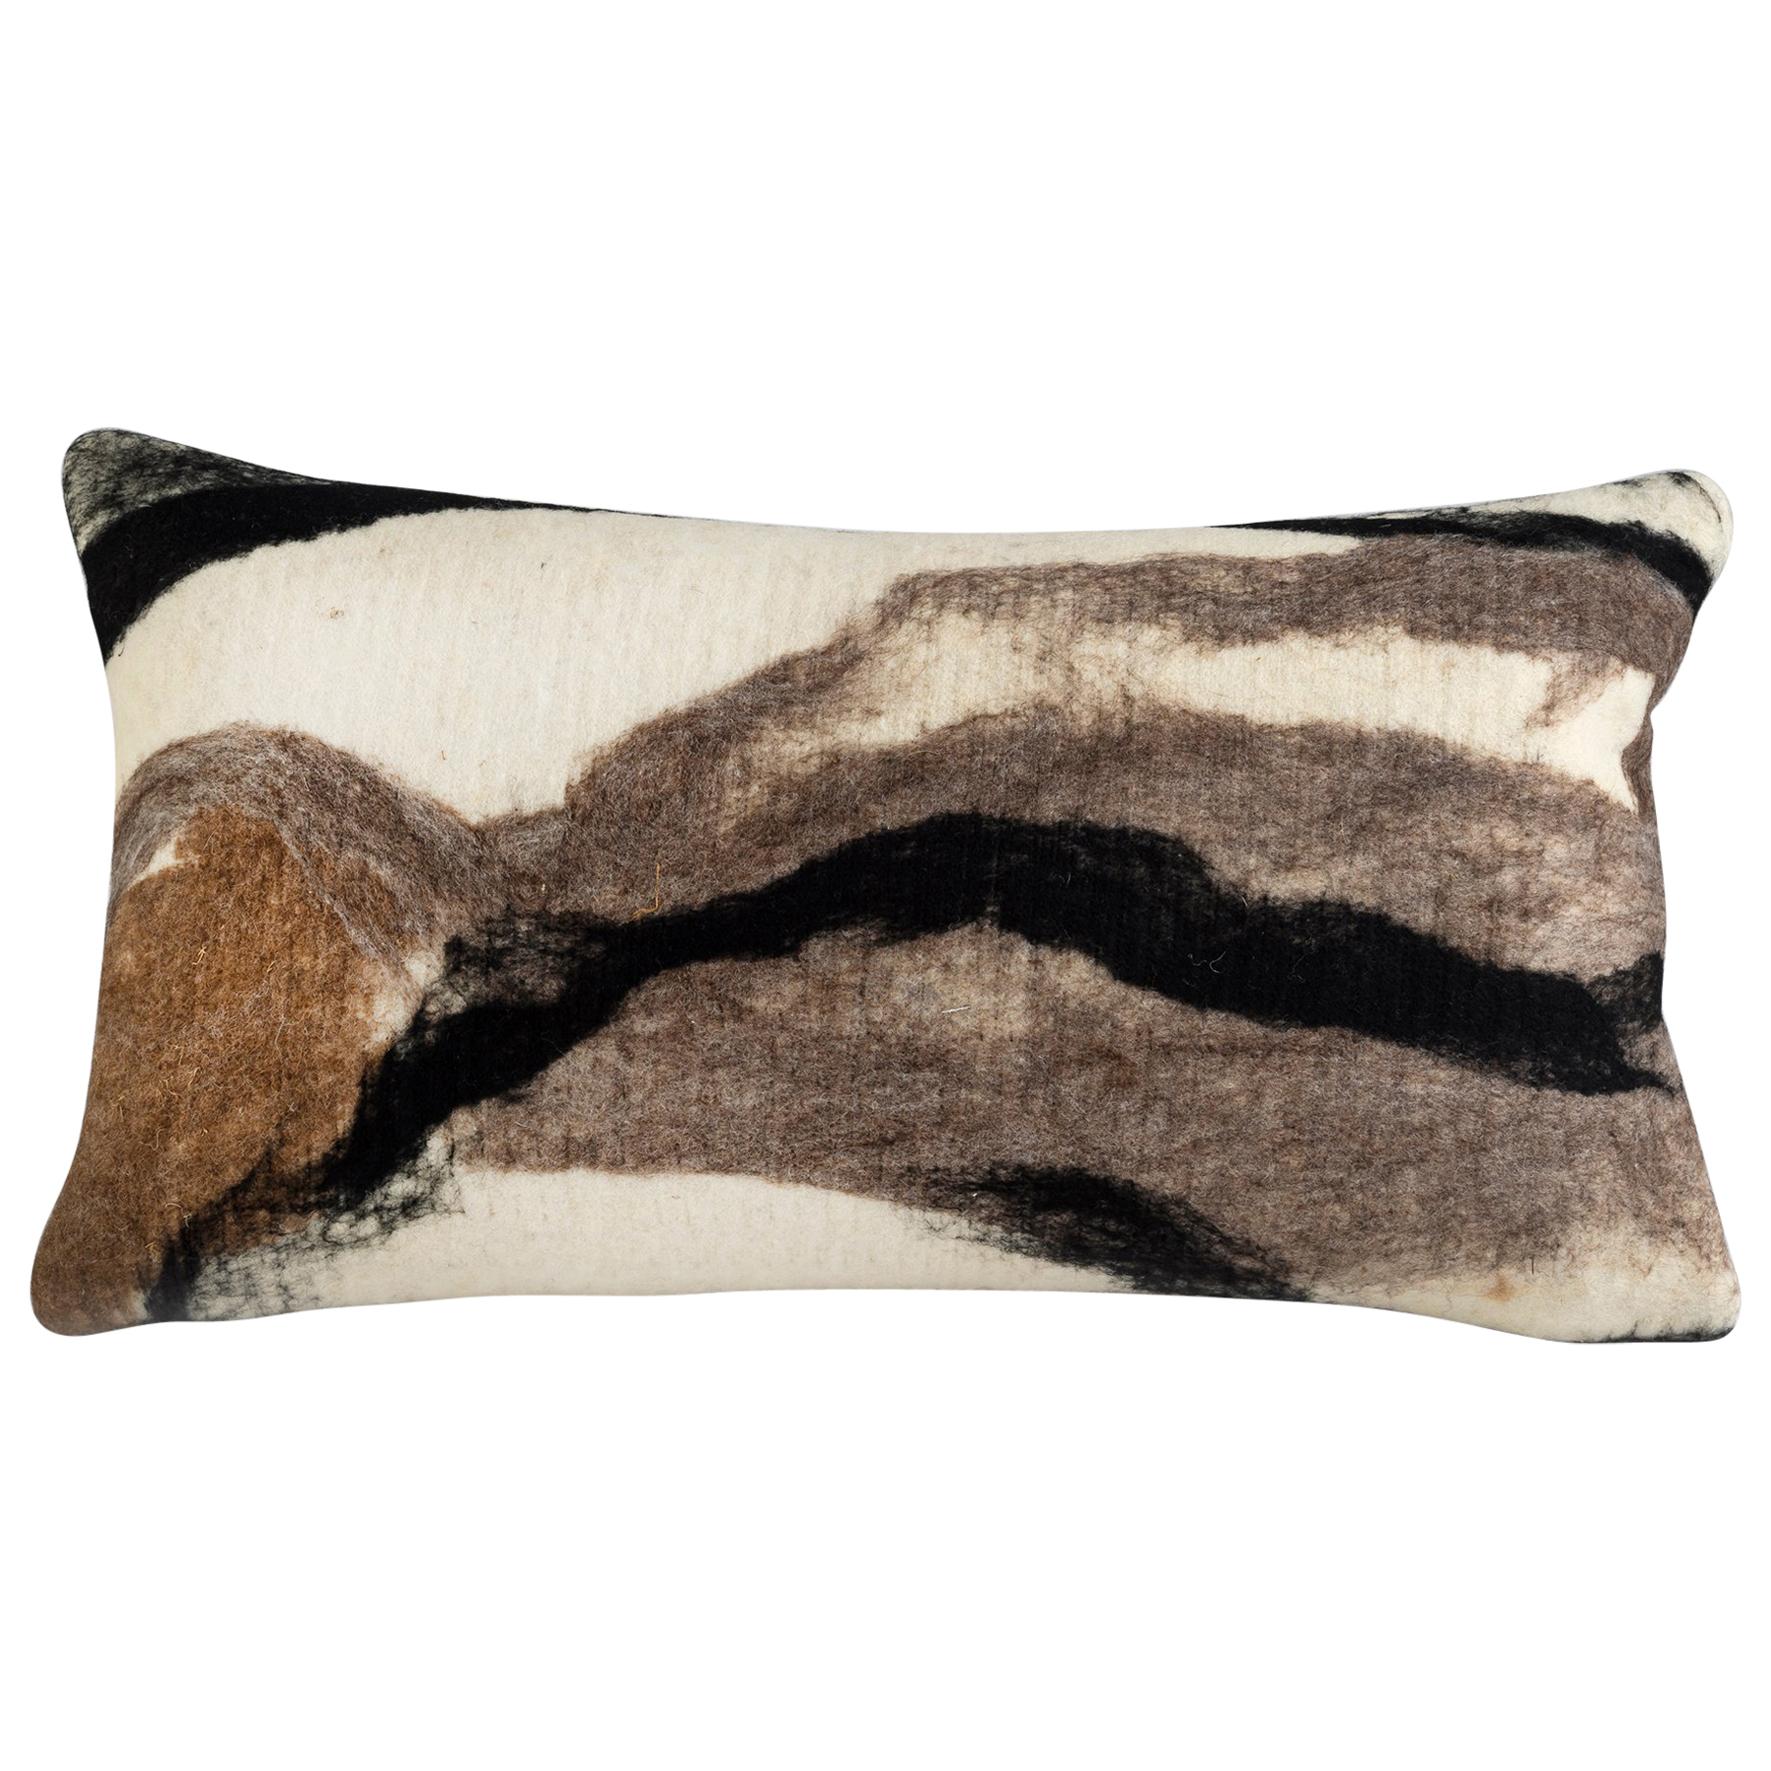 Modern Rustic Wool Pillow Hand-Milled - Heritage Sheep Collection For Sale